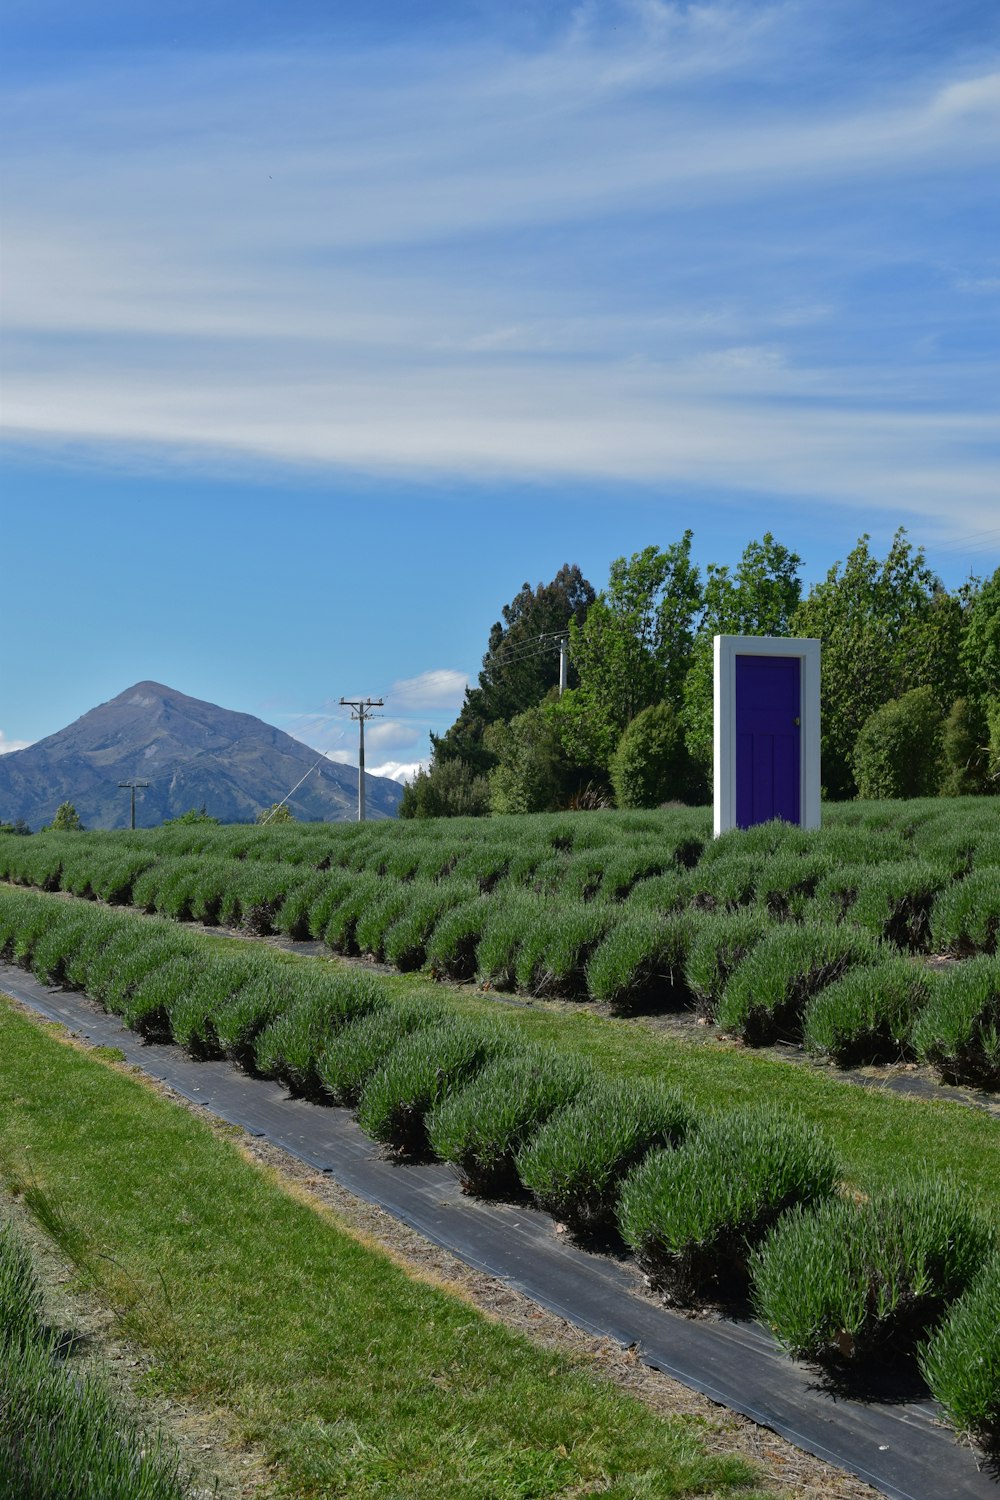 a field of lavender plants with mountains in the background